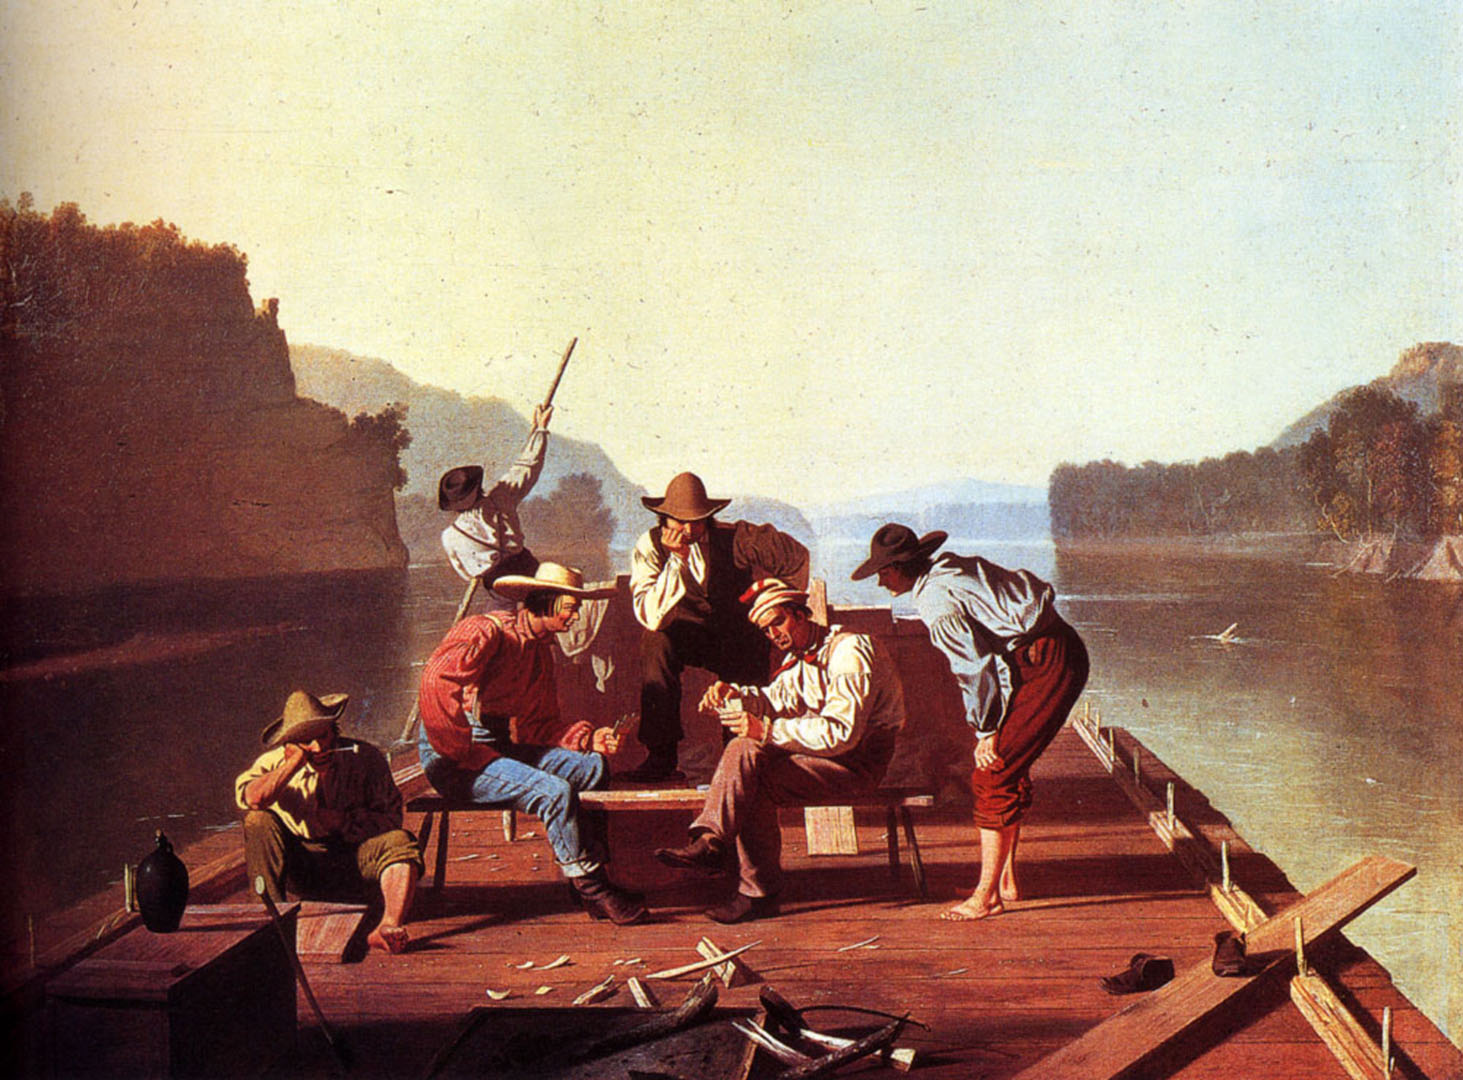 Ferryman Playing Cards - Raftsmen Playing Cards By George Caleb Bingham , HD Wallpaper & Backgrounds